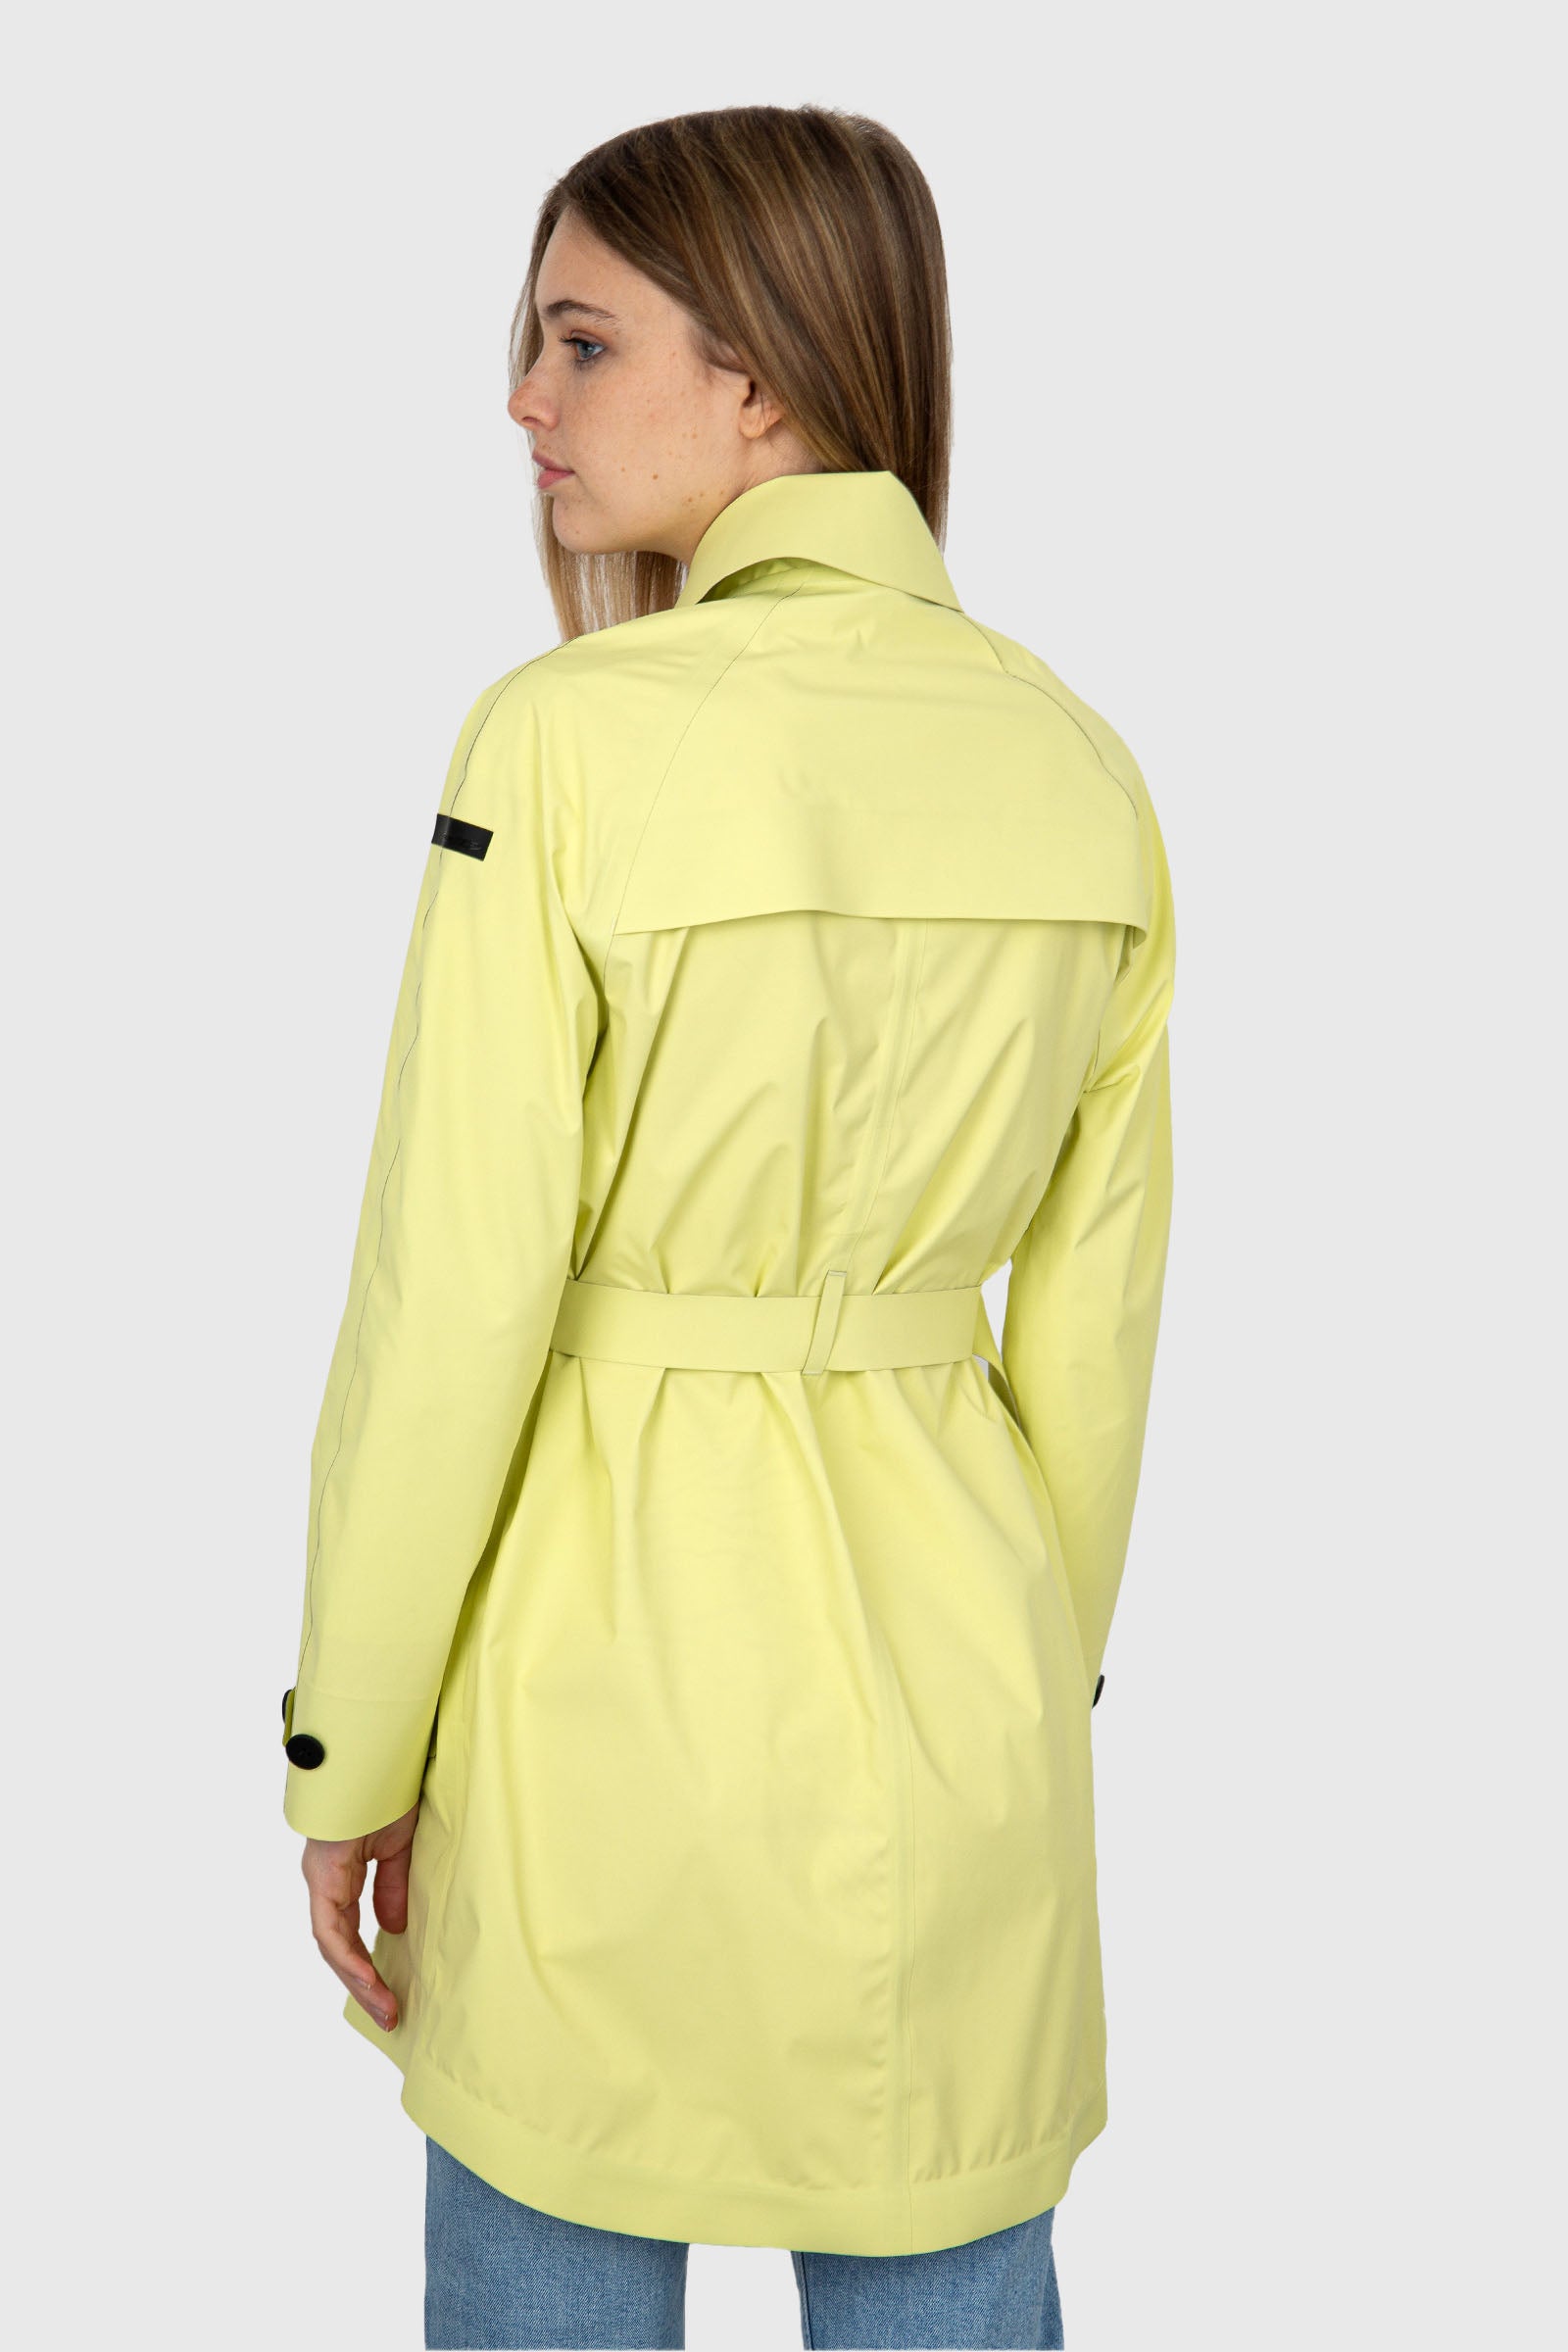 RRD Tech Pack Synthetic Yellow Trench - 4